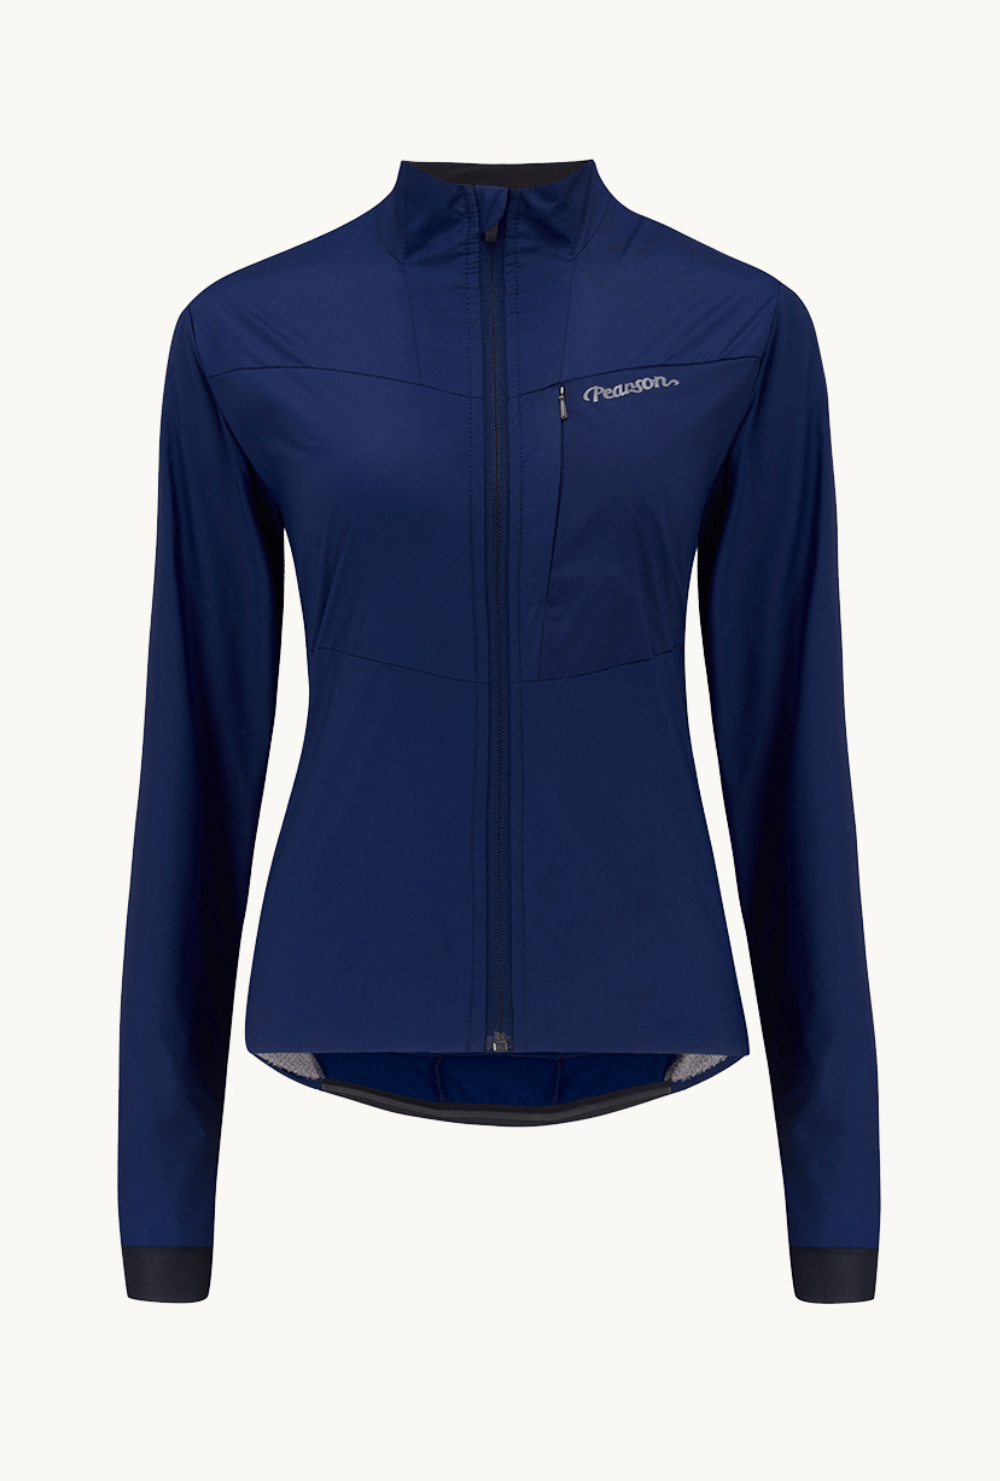 Pearson 1860  Test Your Mettle - Womens Road Insulated Jacket Blue Ink  Blue Ink / Small